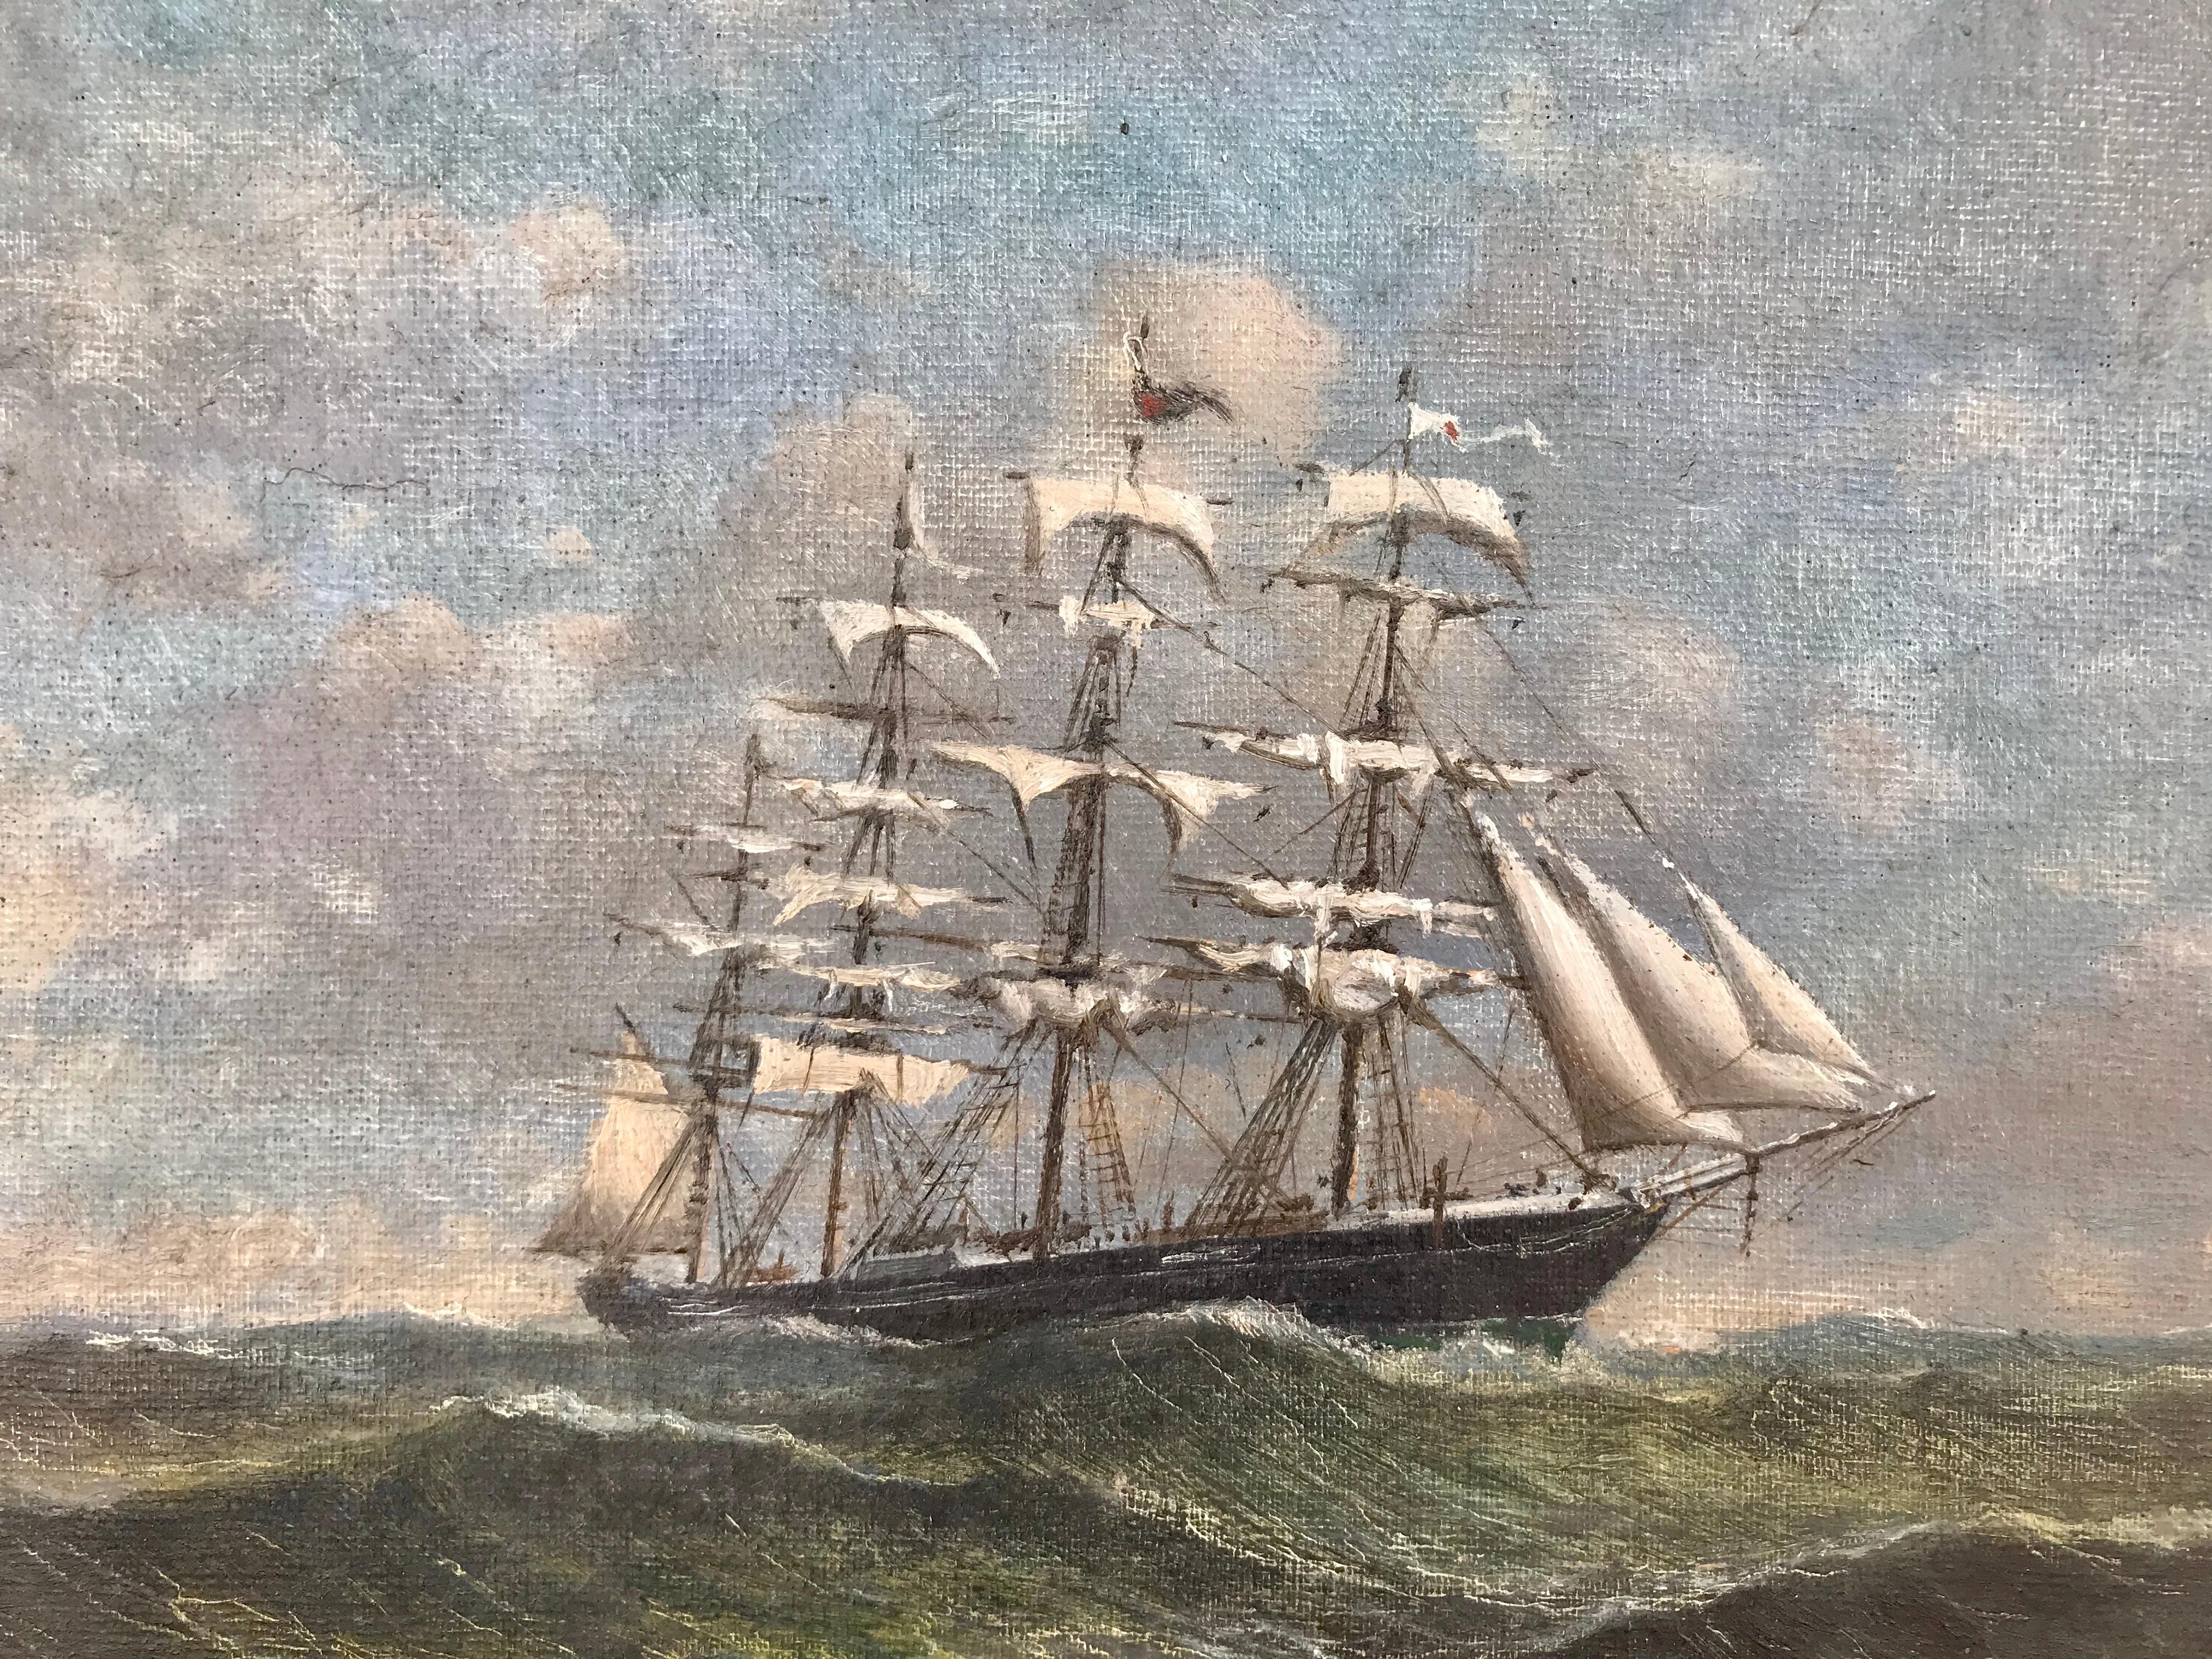 “Clipper in High Seas” - Painting by Unknown